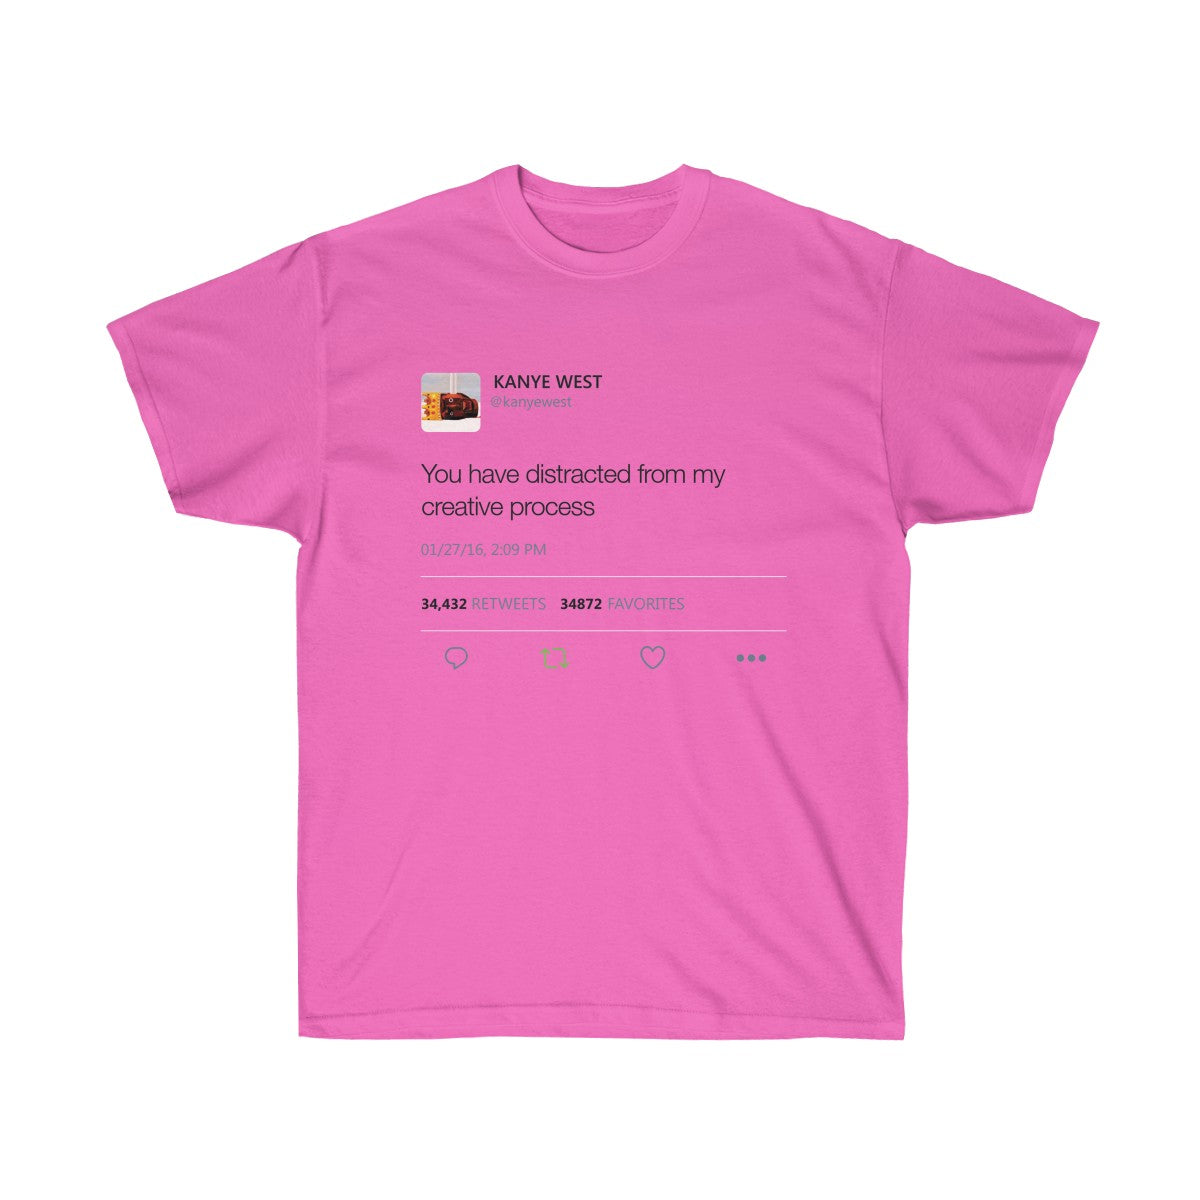 You have distracted from my creative process - Kanye West Tweet T-Shirt-Azalea-S-Archethype